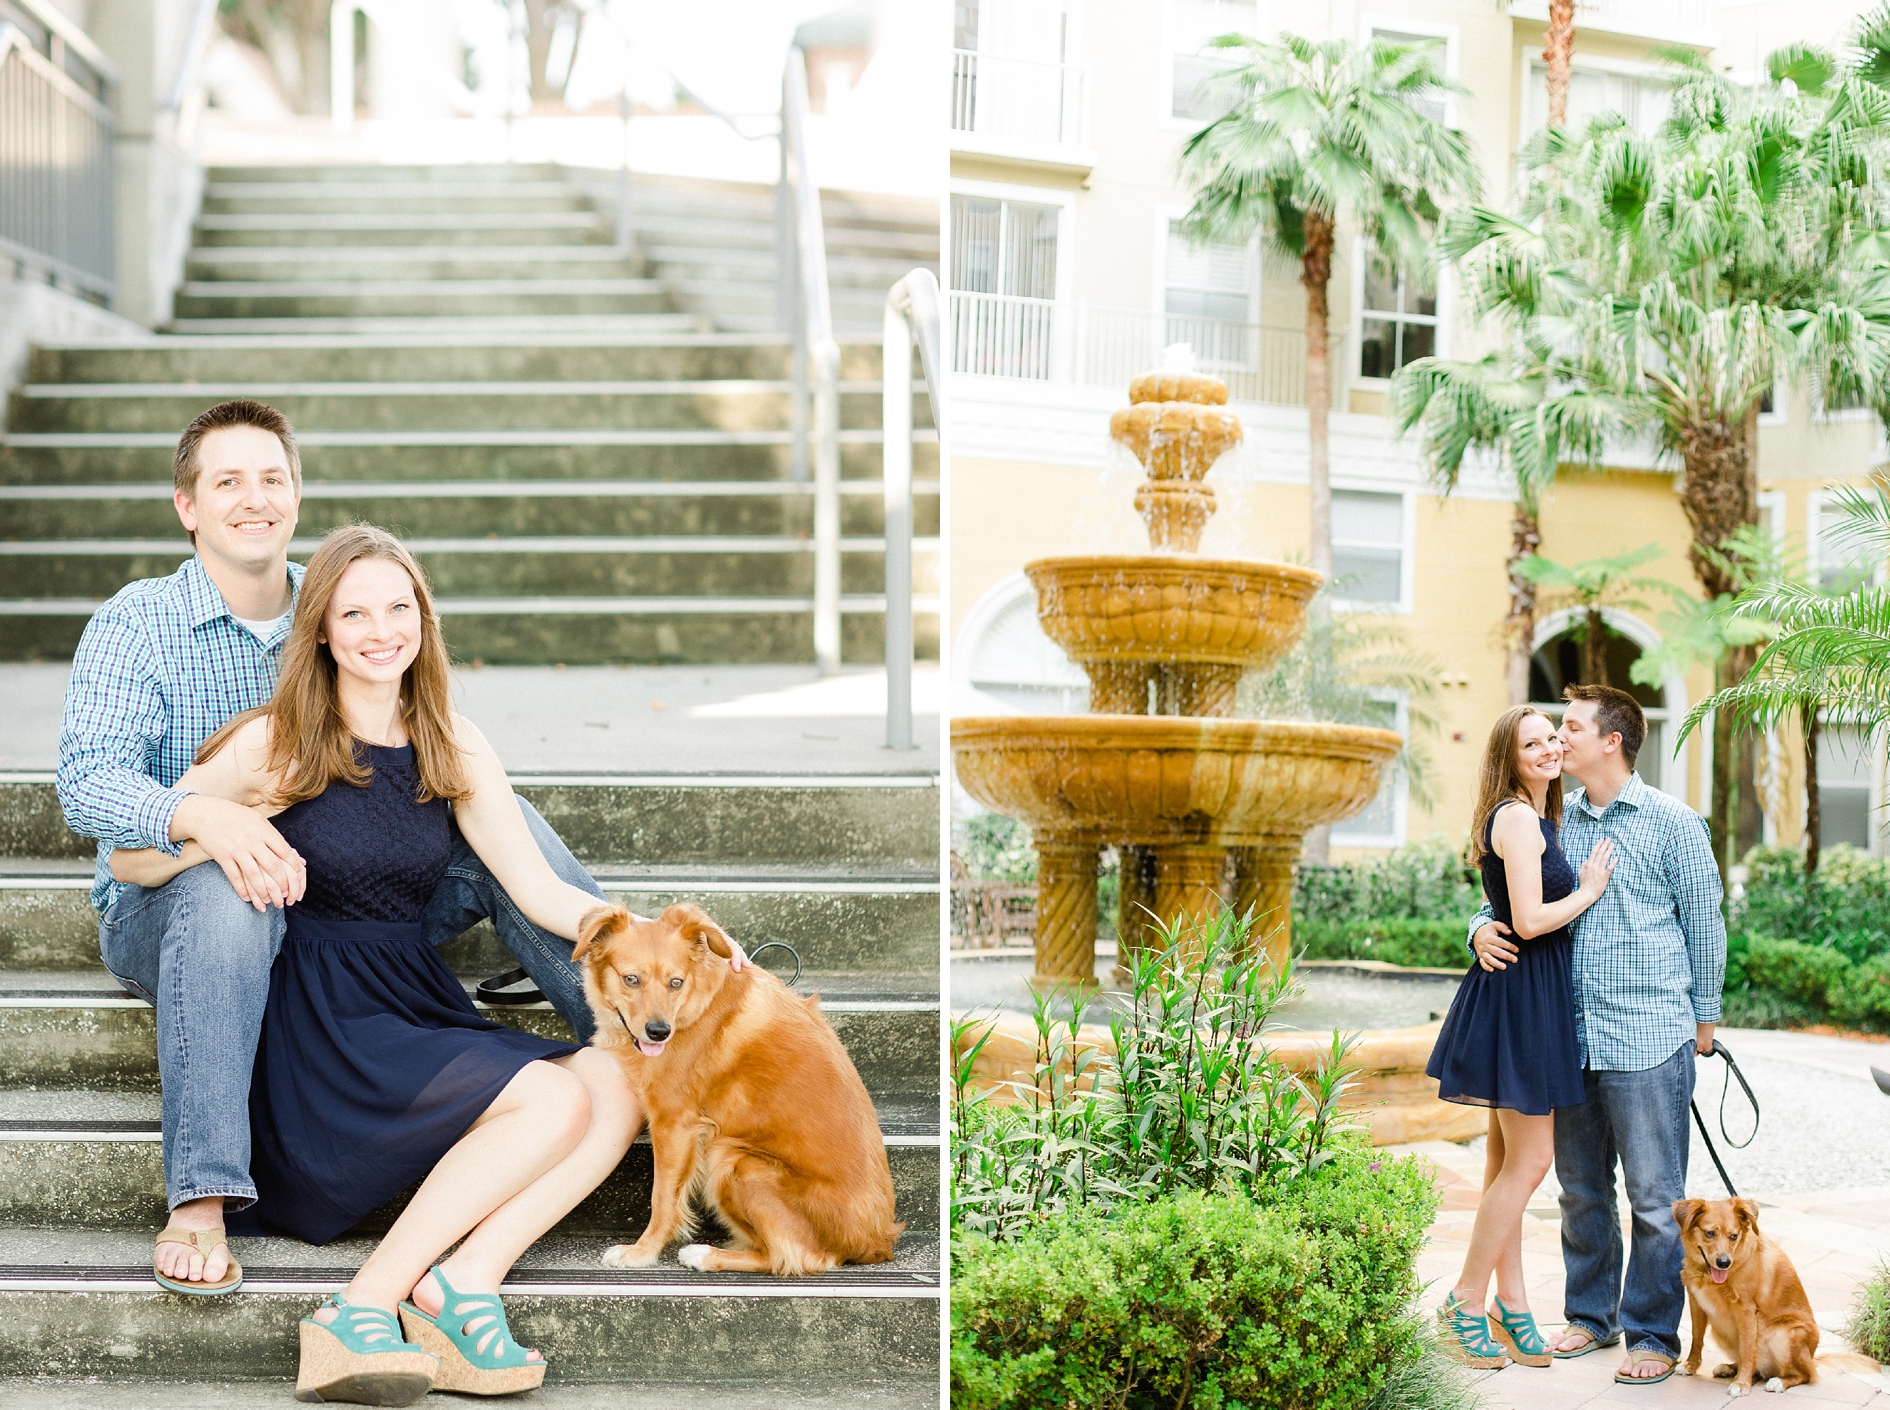 Harbor Island Engagement | © Ailyn La Torre Photography 2016